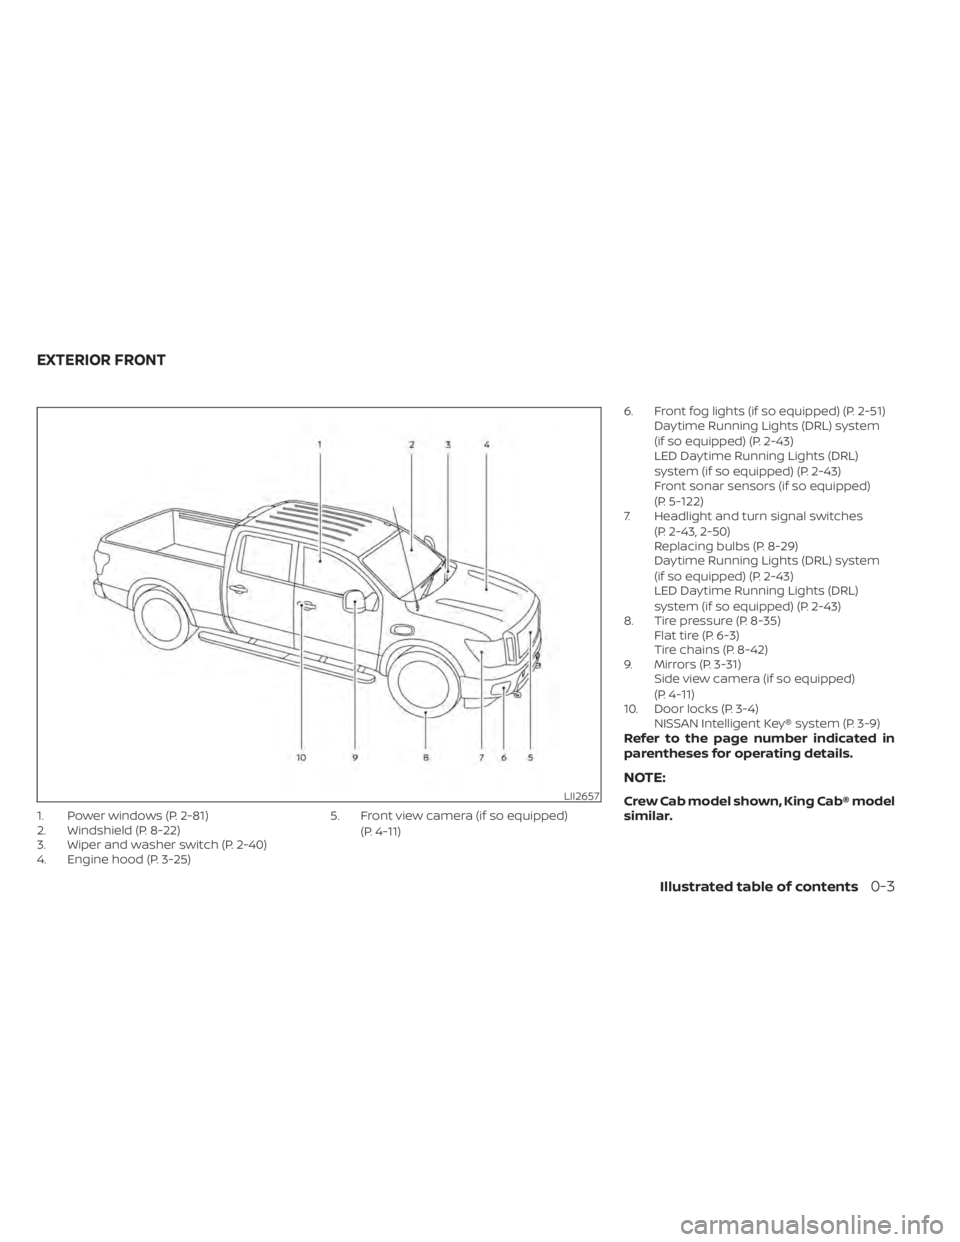 NISSAN TITAN 2021  Owner´s Manual 1. Power windows (P. 2-81)
2. Windshield (P. 8-22)
3. Wiper and washer switch (P. 2-40)
4. Engine hood (P. 3-25)5. Front view camera (if so equipped)
(P. 4-11) 6. Front fog lights (if so equipped) (P.